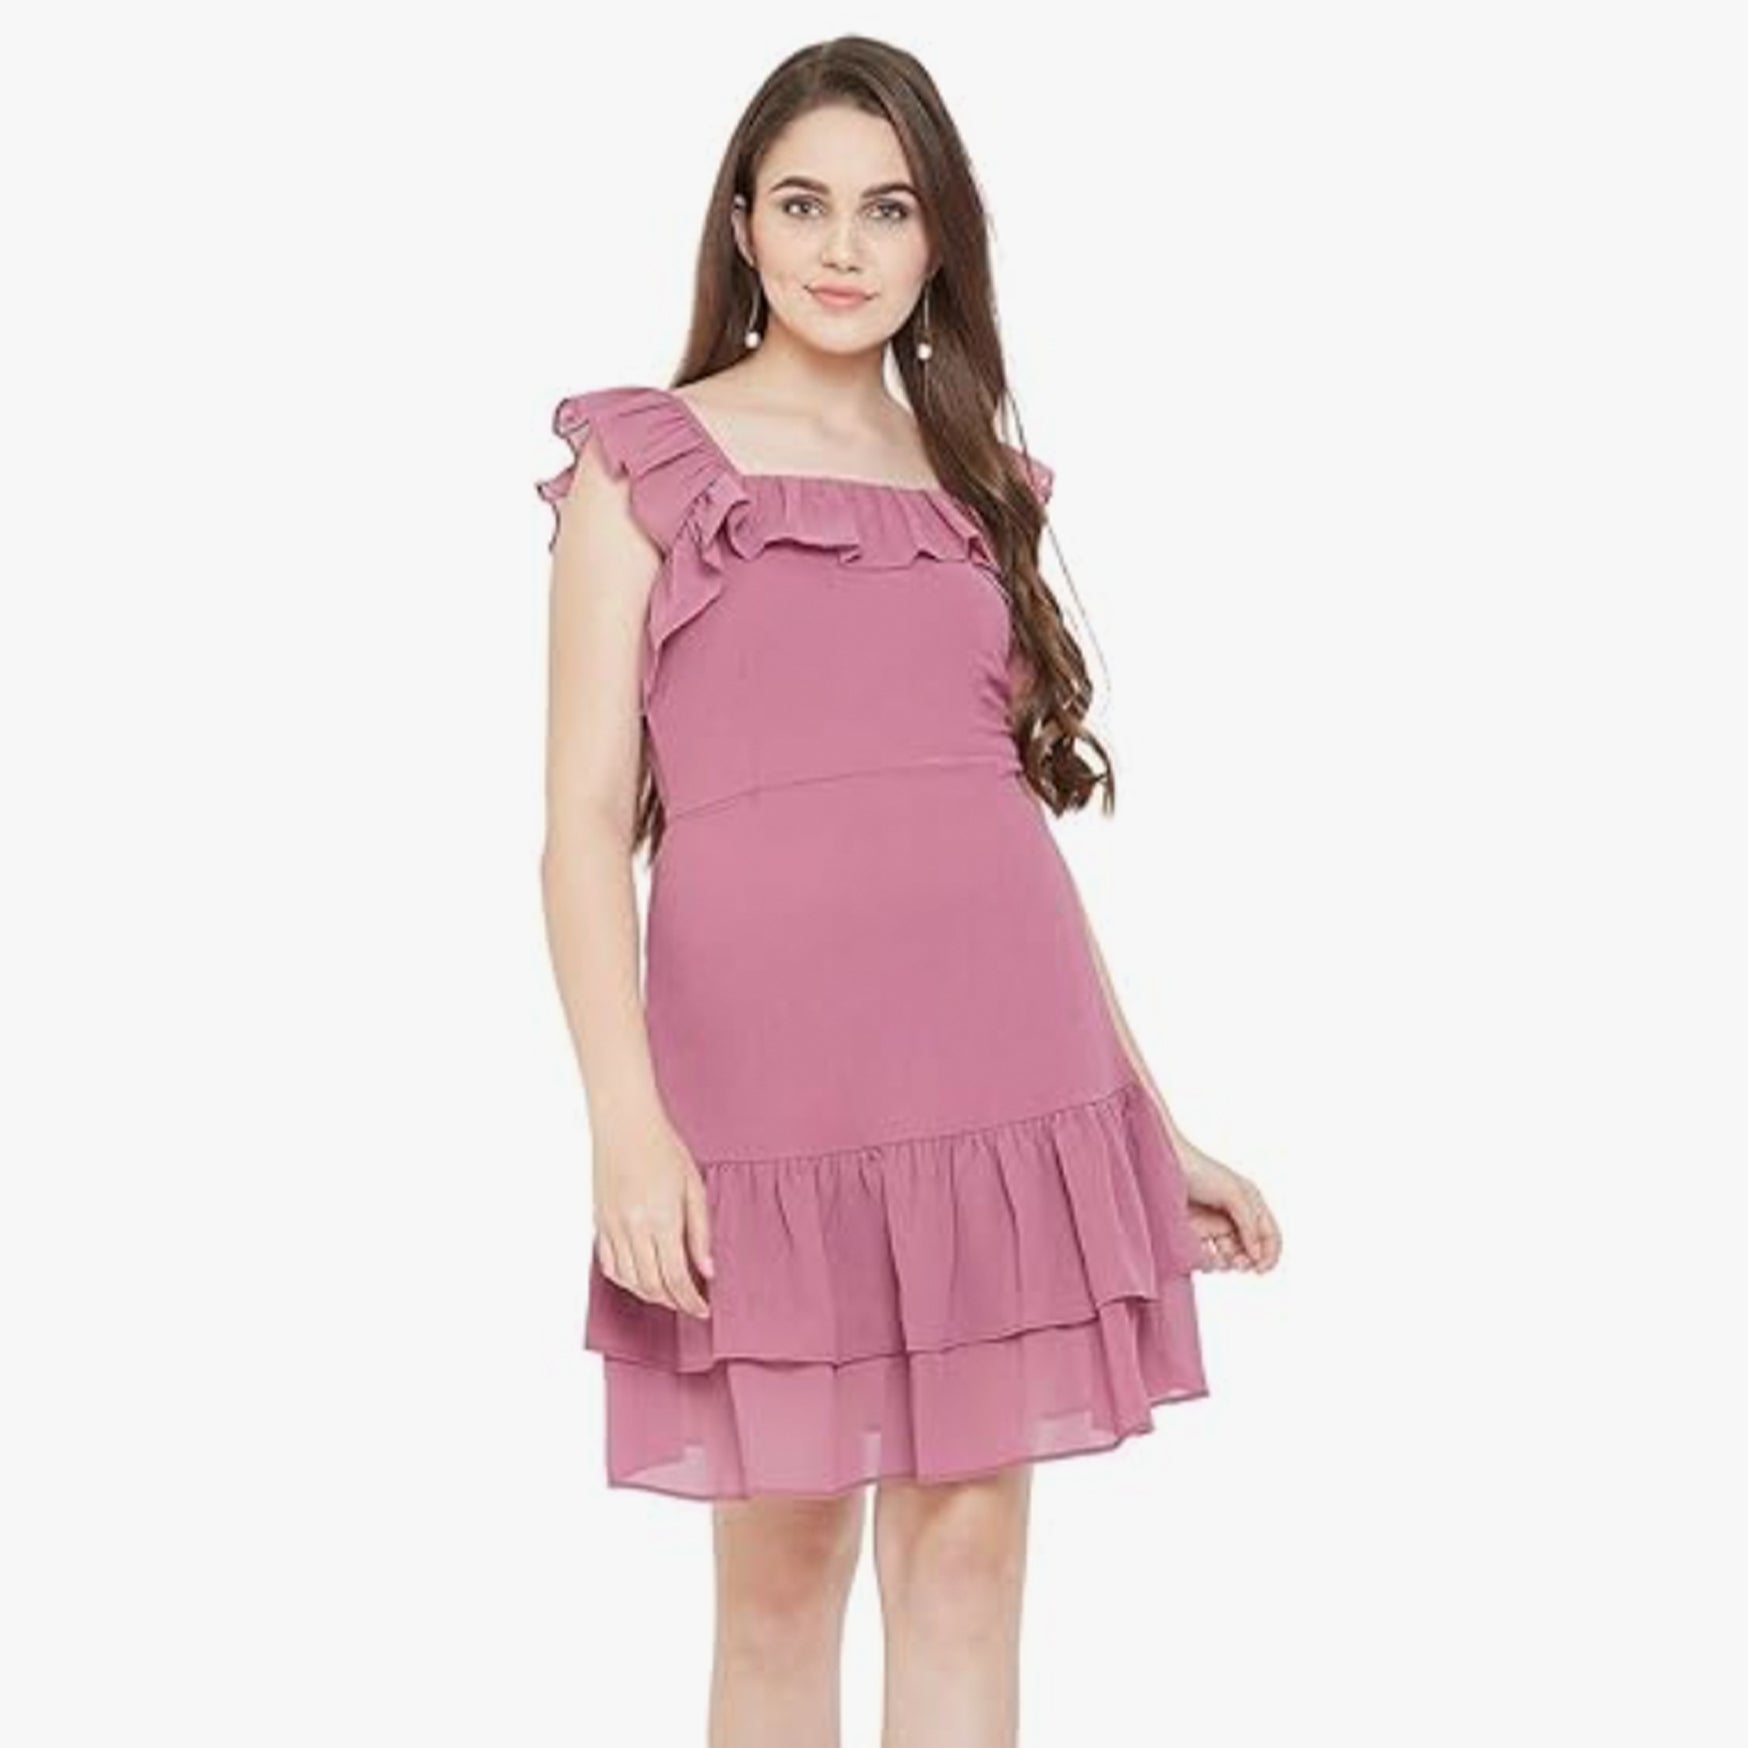 Imfashini Women's Synthetic A-Line Dress (Dr1506115_Pink_S, Pink, S)